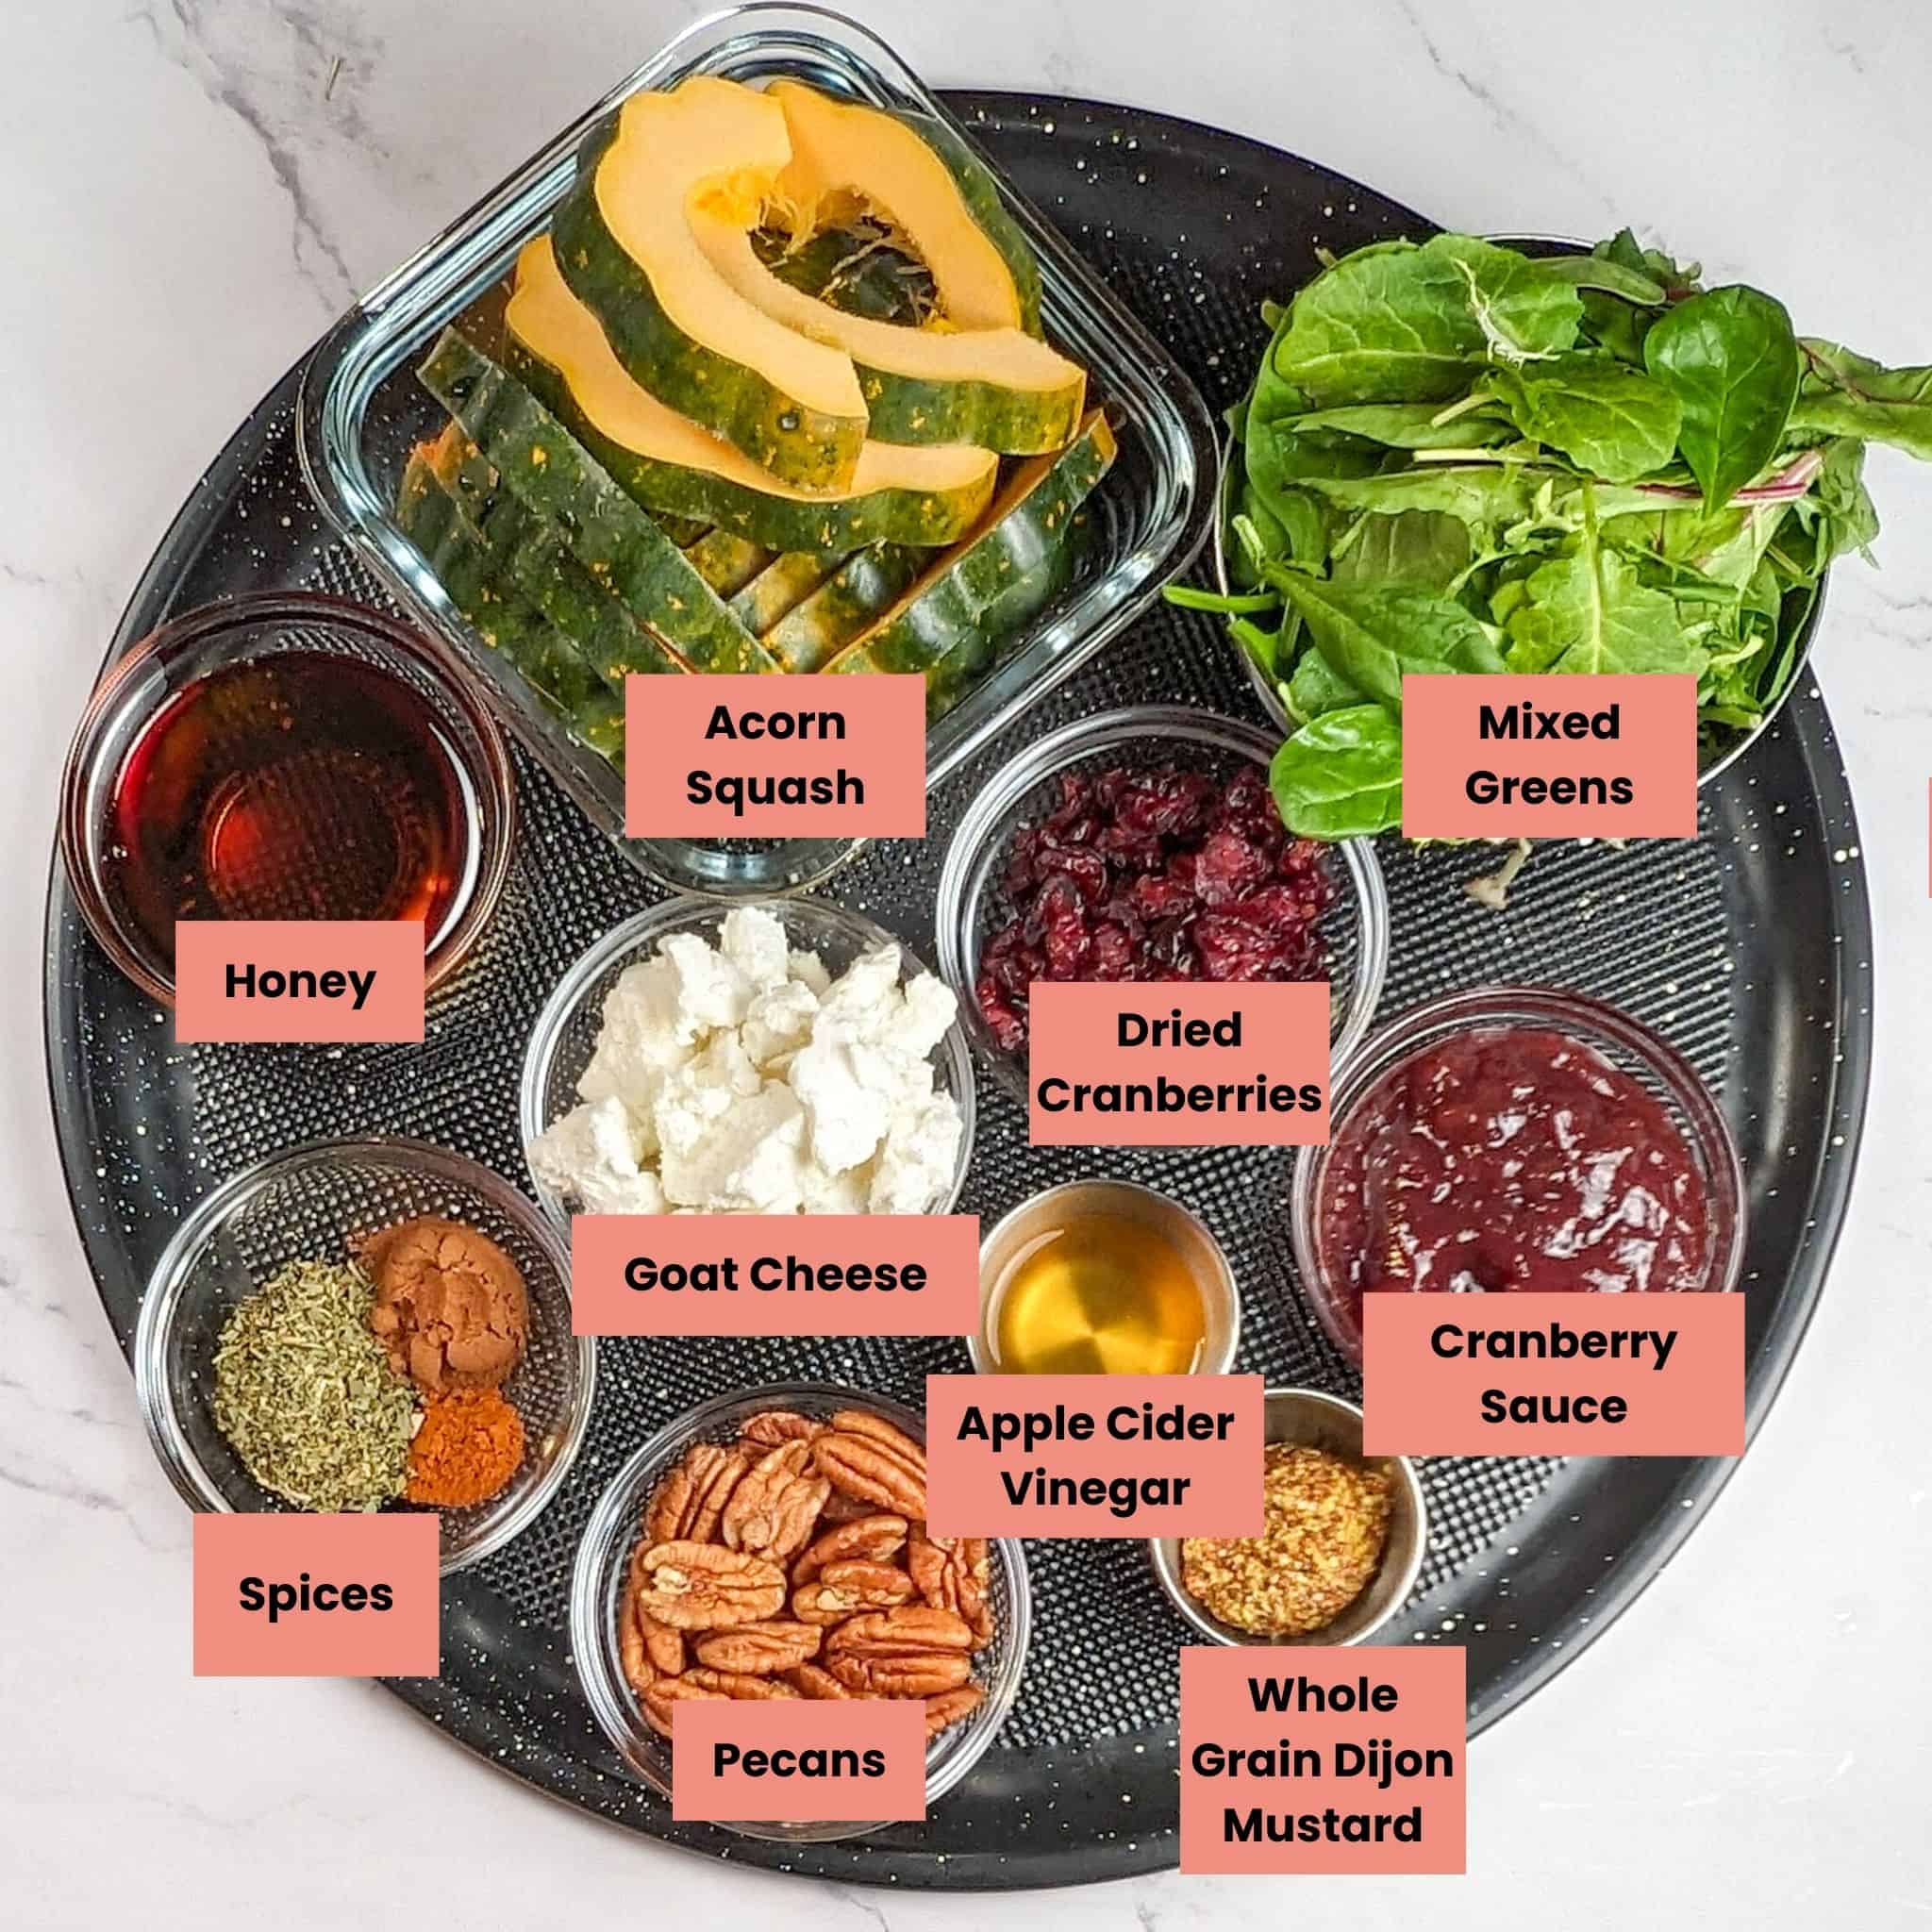 ingredients in containers on a large pizza pan for the top view of the Chicken Paillard with Cranberry Pecan Acorn Squash Salad